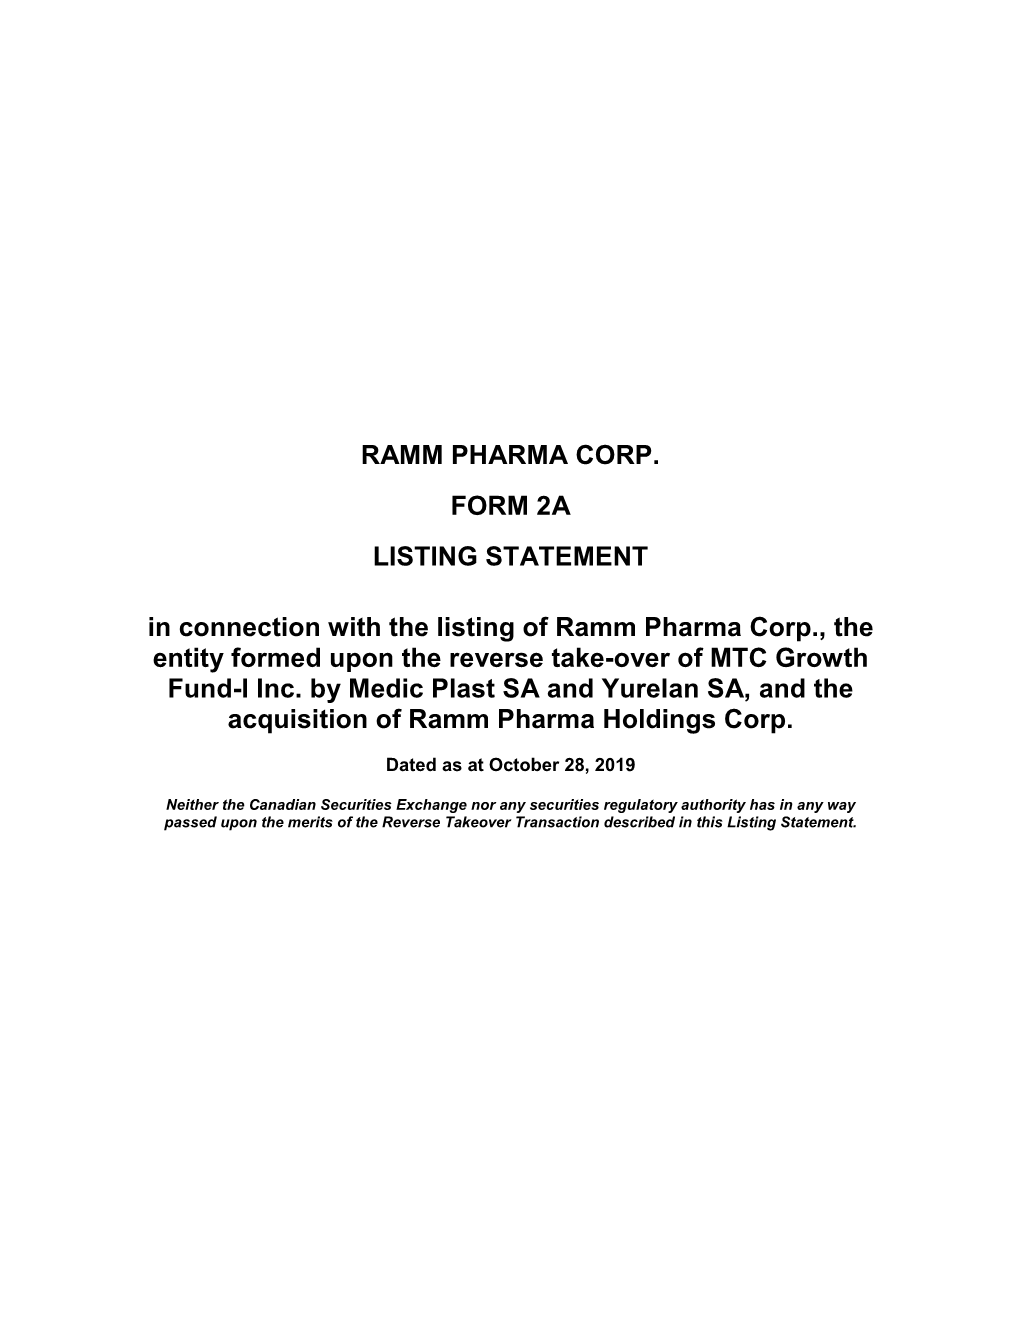 RAMM PHARMA CORP. FORM 2A LISTING STATEMENT in Connection with the Listing of Ramm Pharma Corp., the Entity Formed Upon the Reverse Take-Over of MTC Growth Fund-I Inc